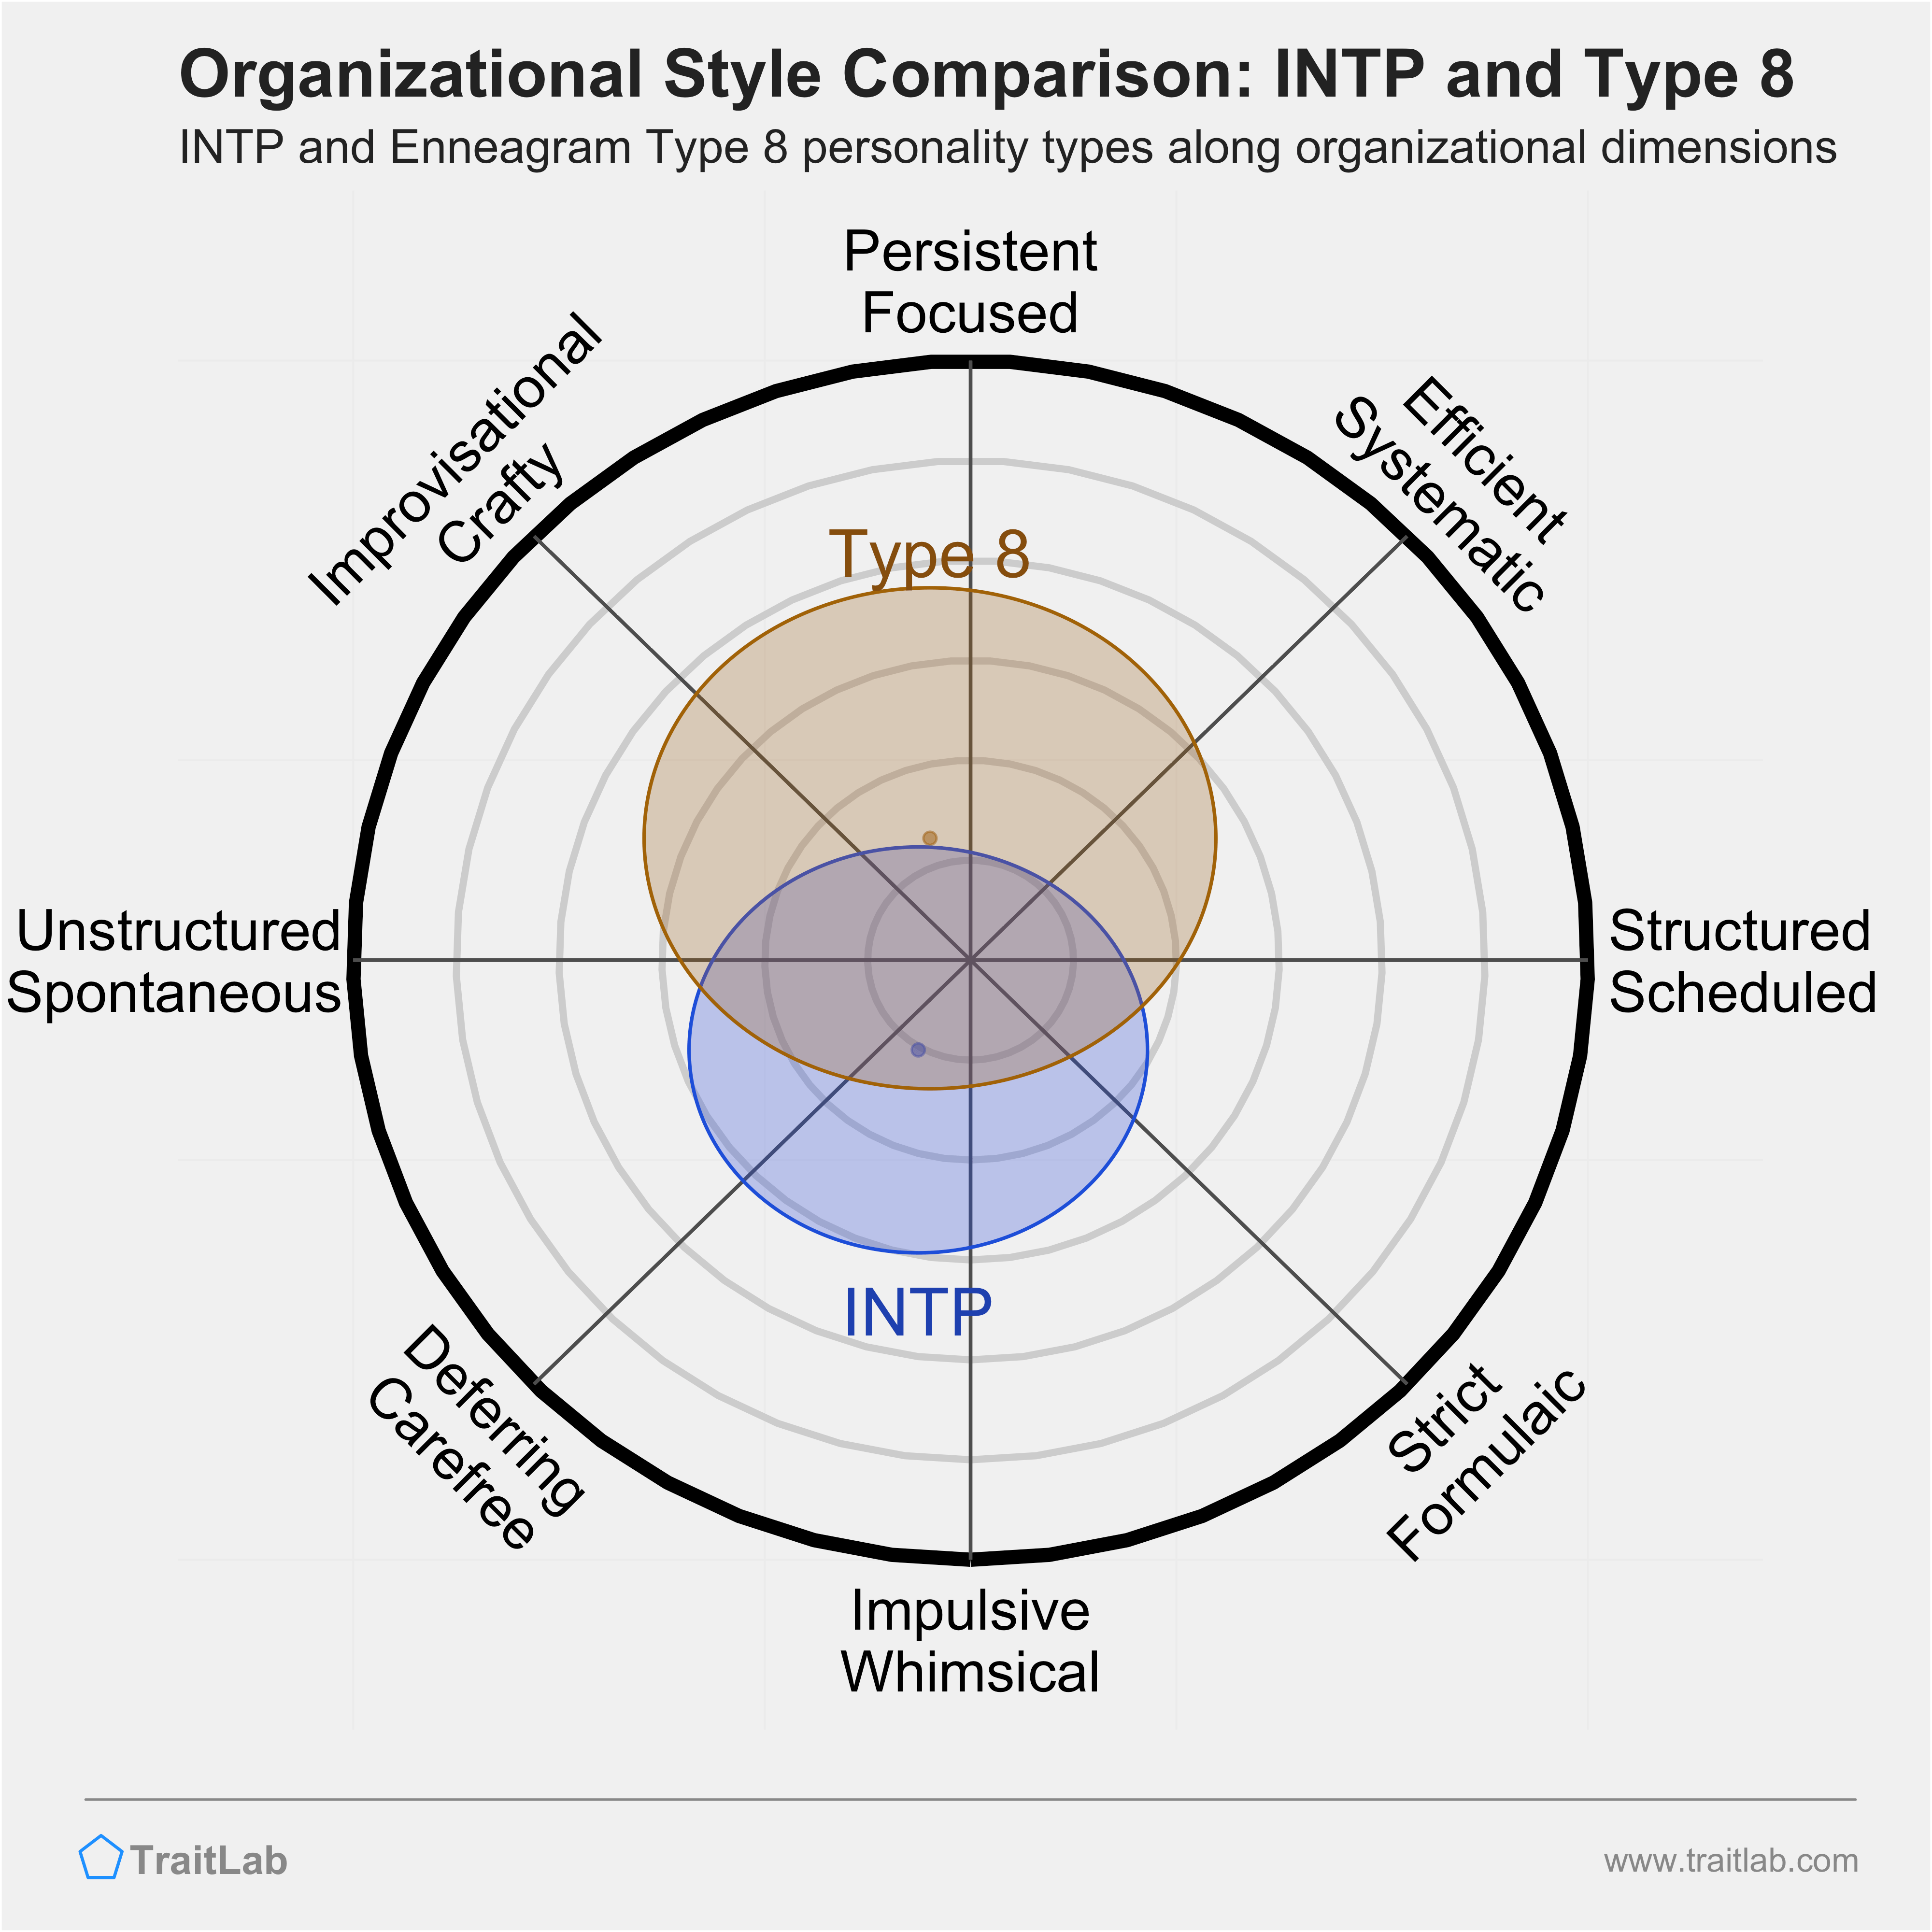 INTP and Type 8 comparison across organizational dimensions